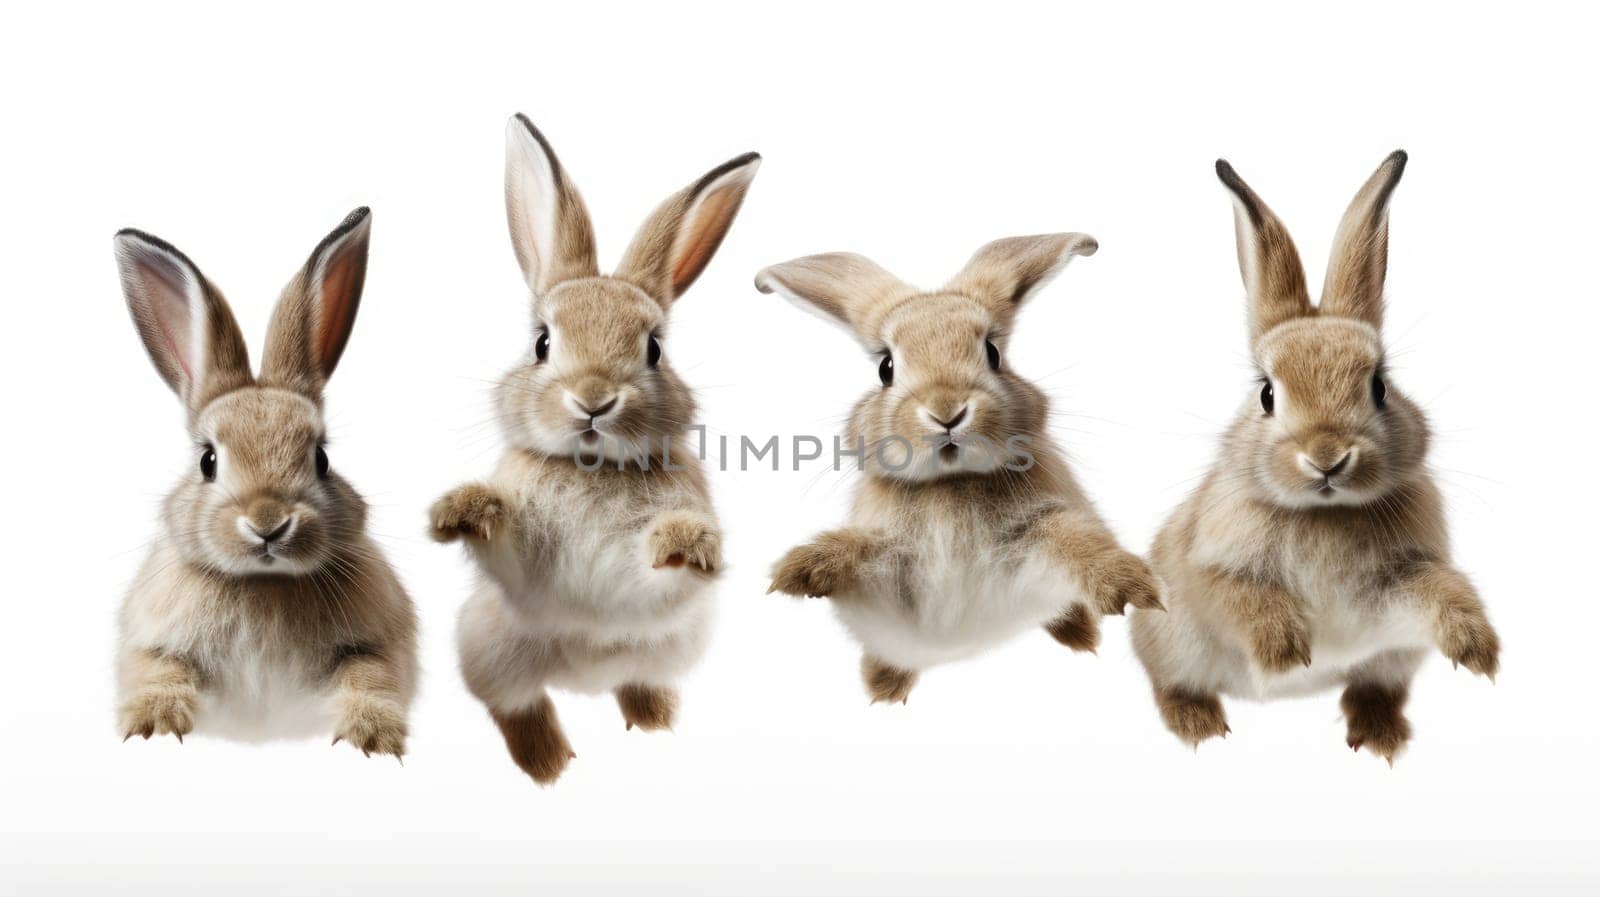 Four brown rabbits standing on hind legs in a charming pose against a white backdrop. Perfect for pet stores, animal shelters, vet clinics. Shows their natural beauty and playful spirit.